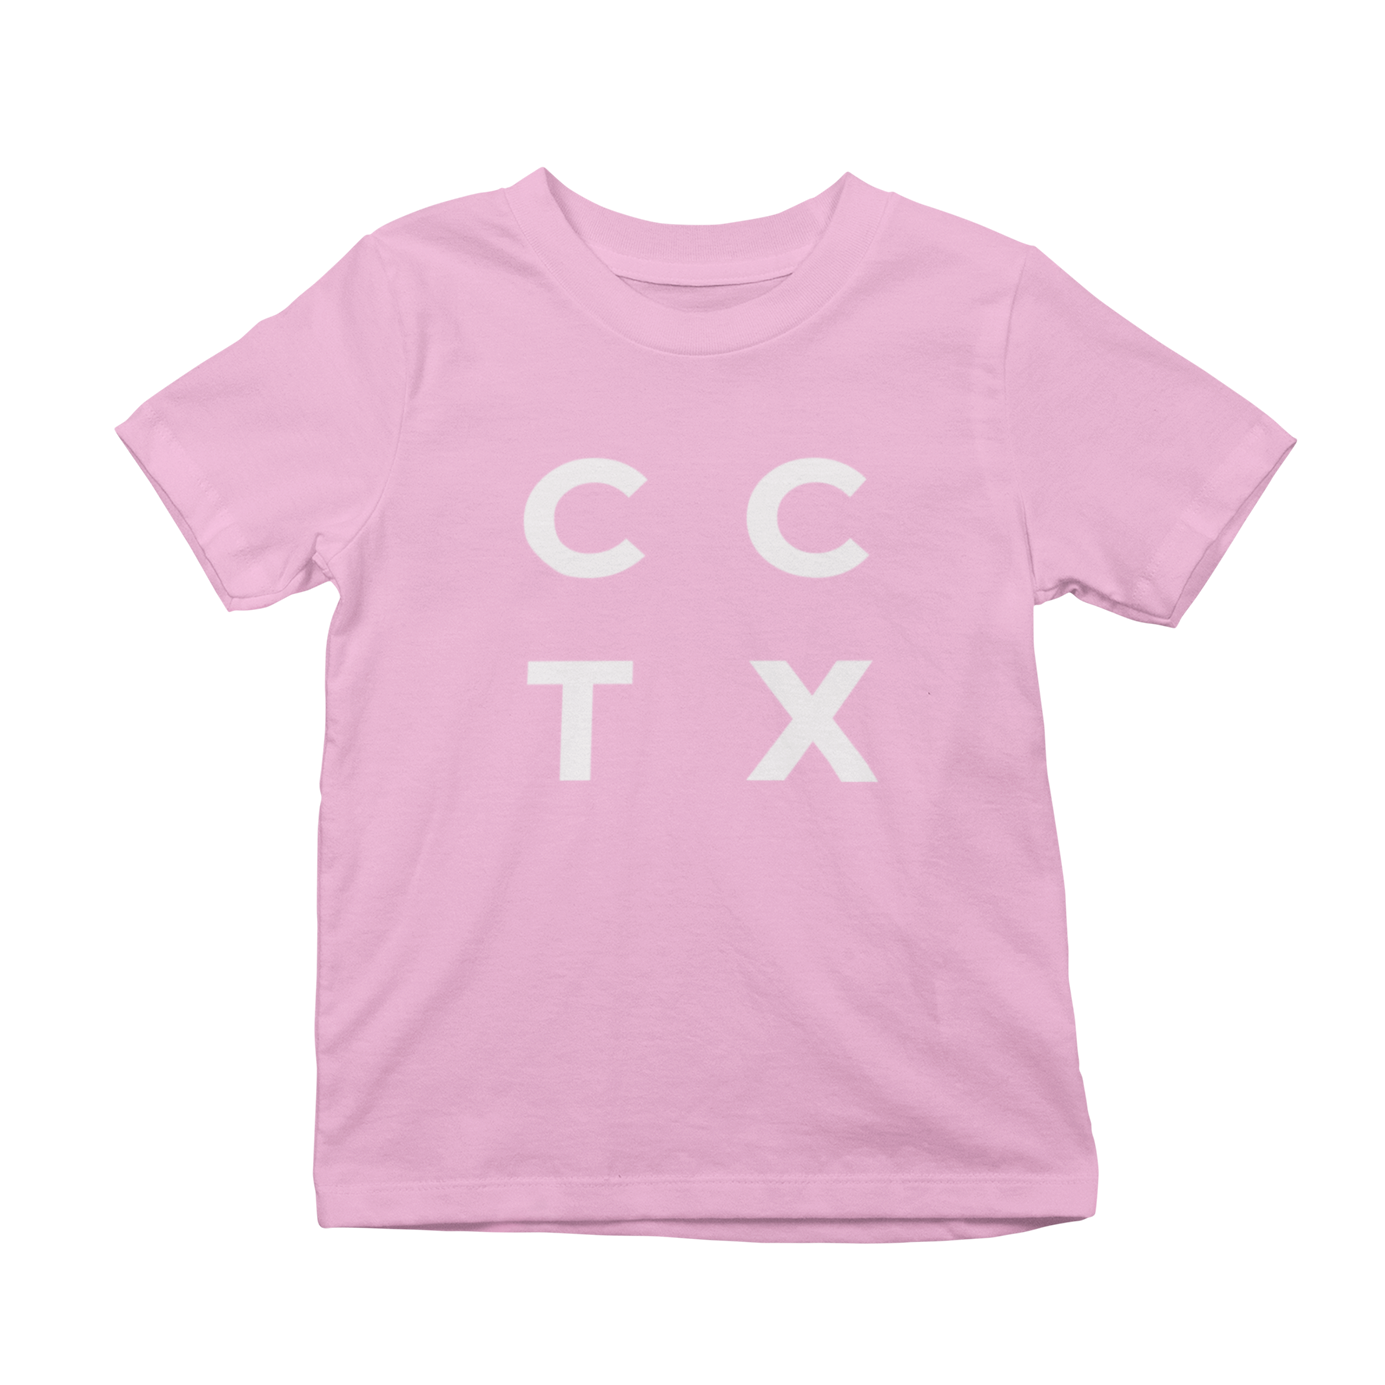 CCTX Stacked Youth T-Shirts